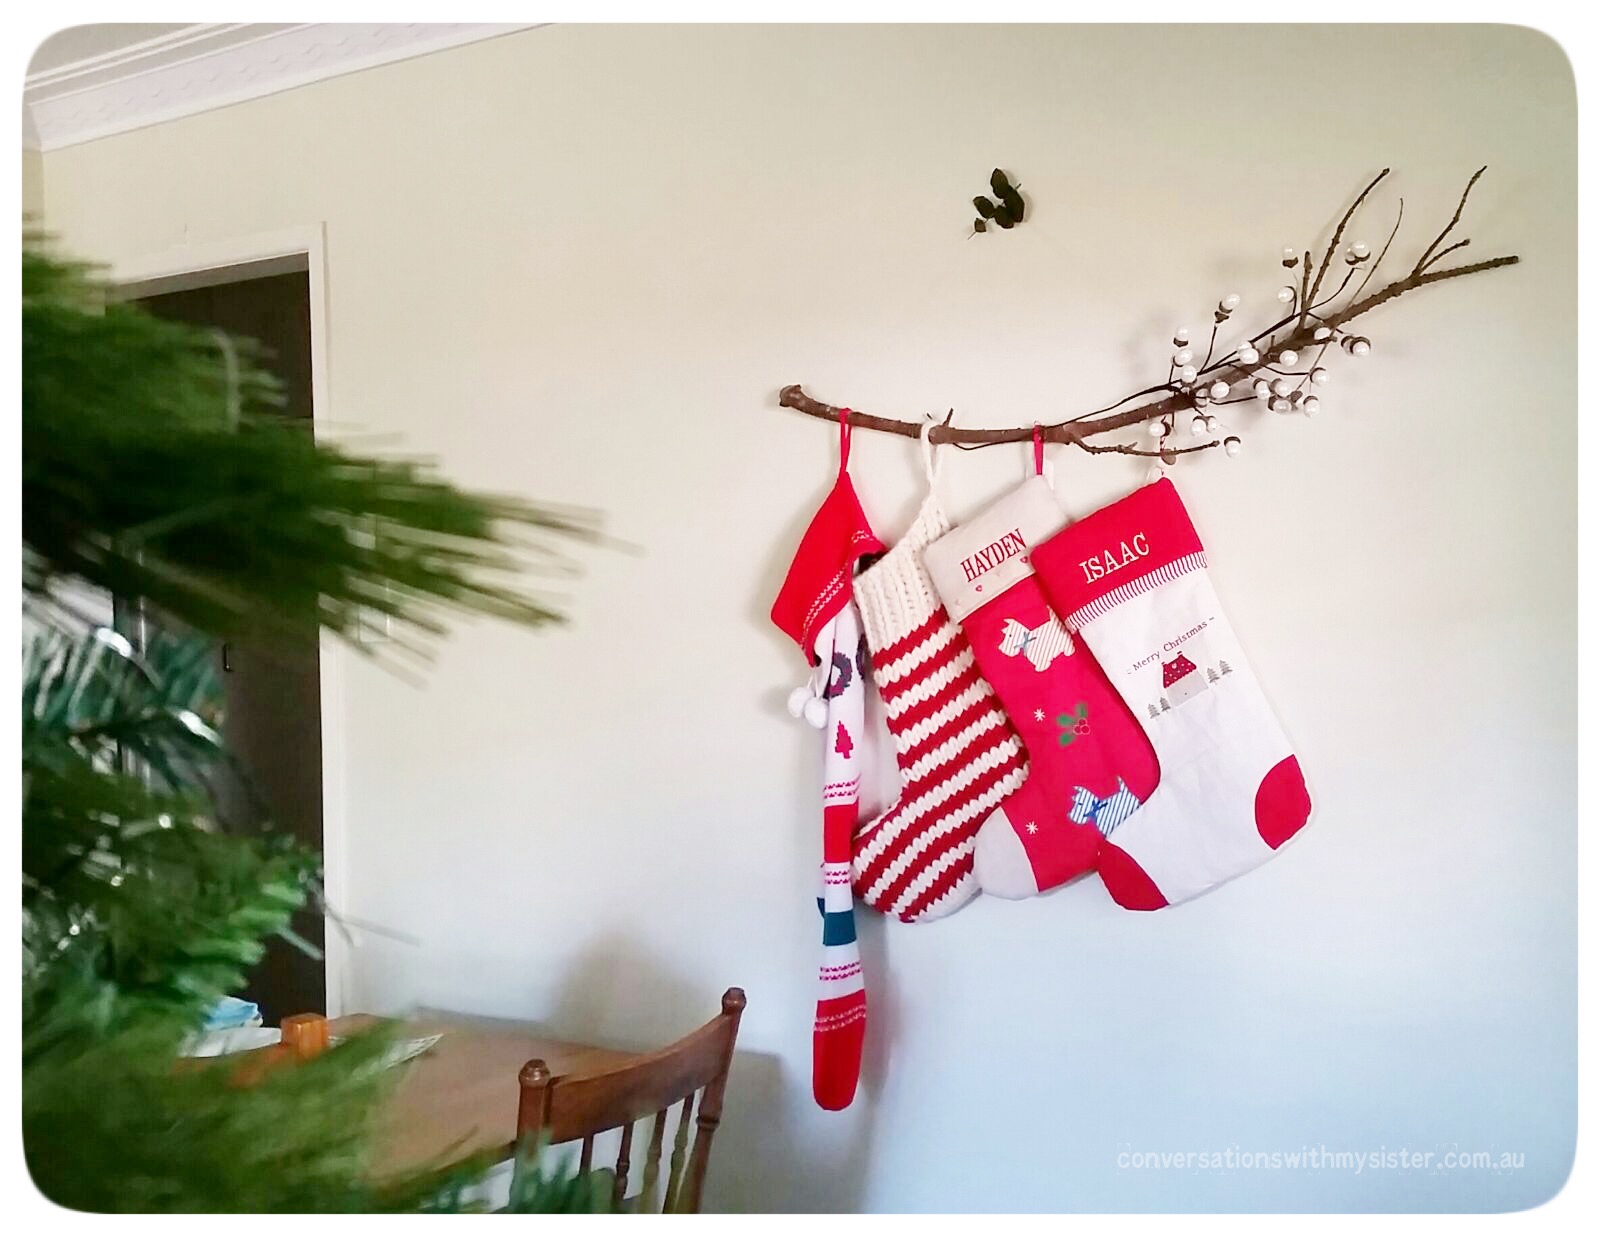 Here are three quirky decorating ideas showing how nature can be incorporated to create your own personalised and simplistic homemade Christmas style. 